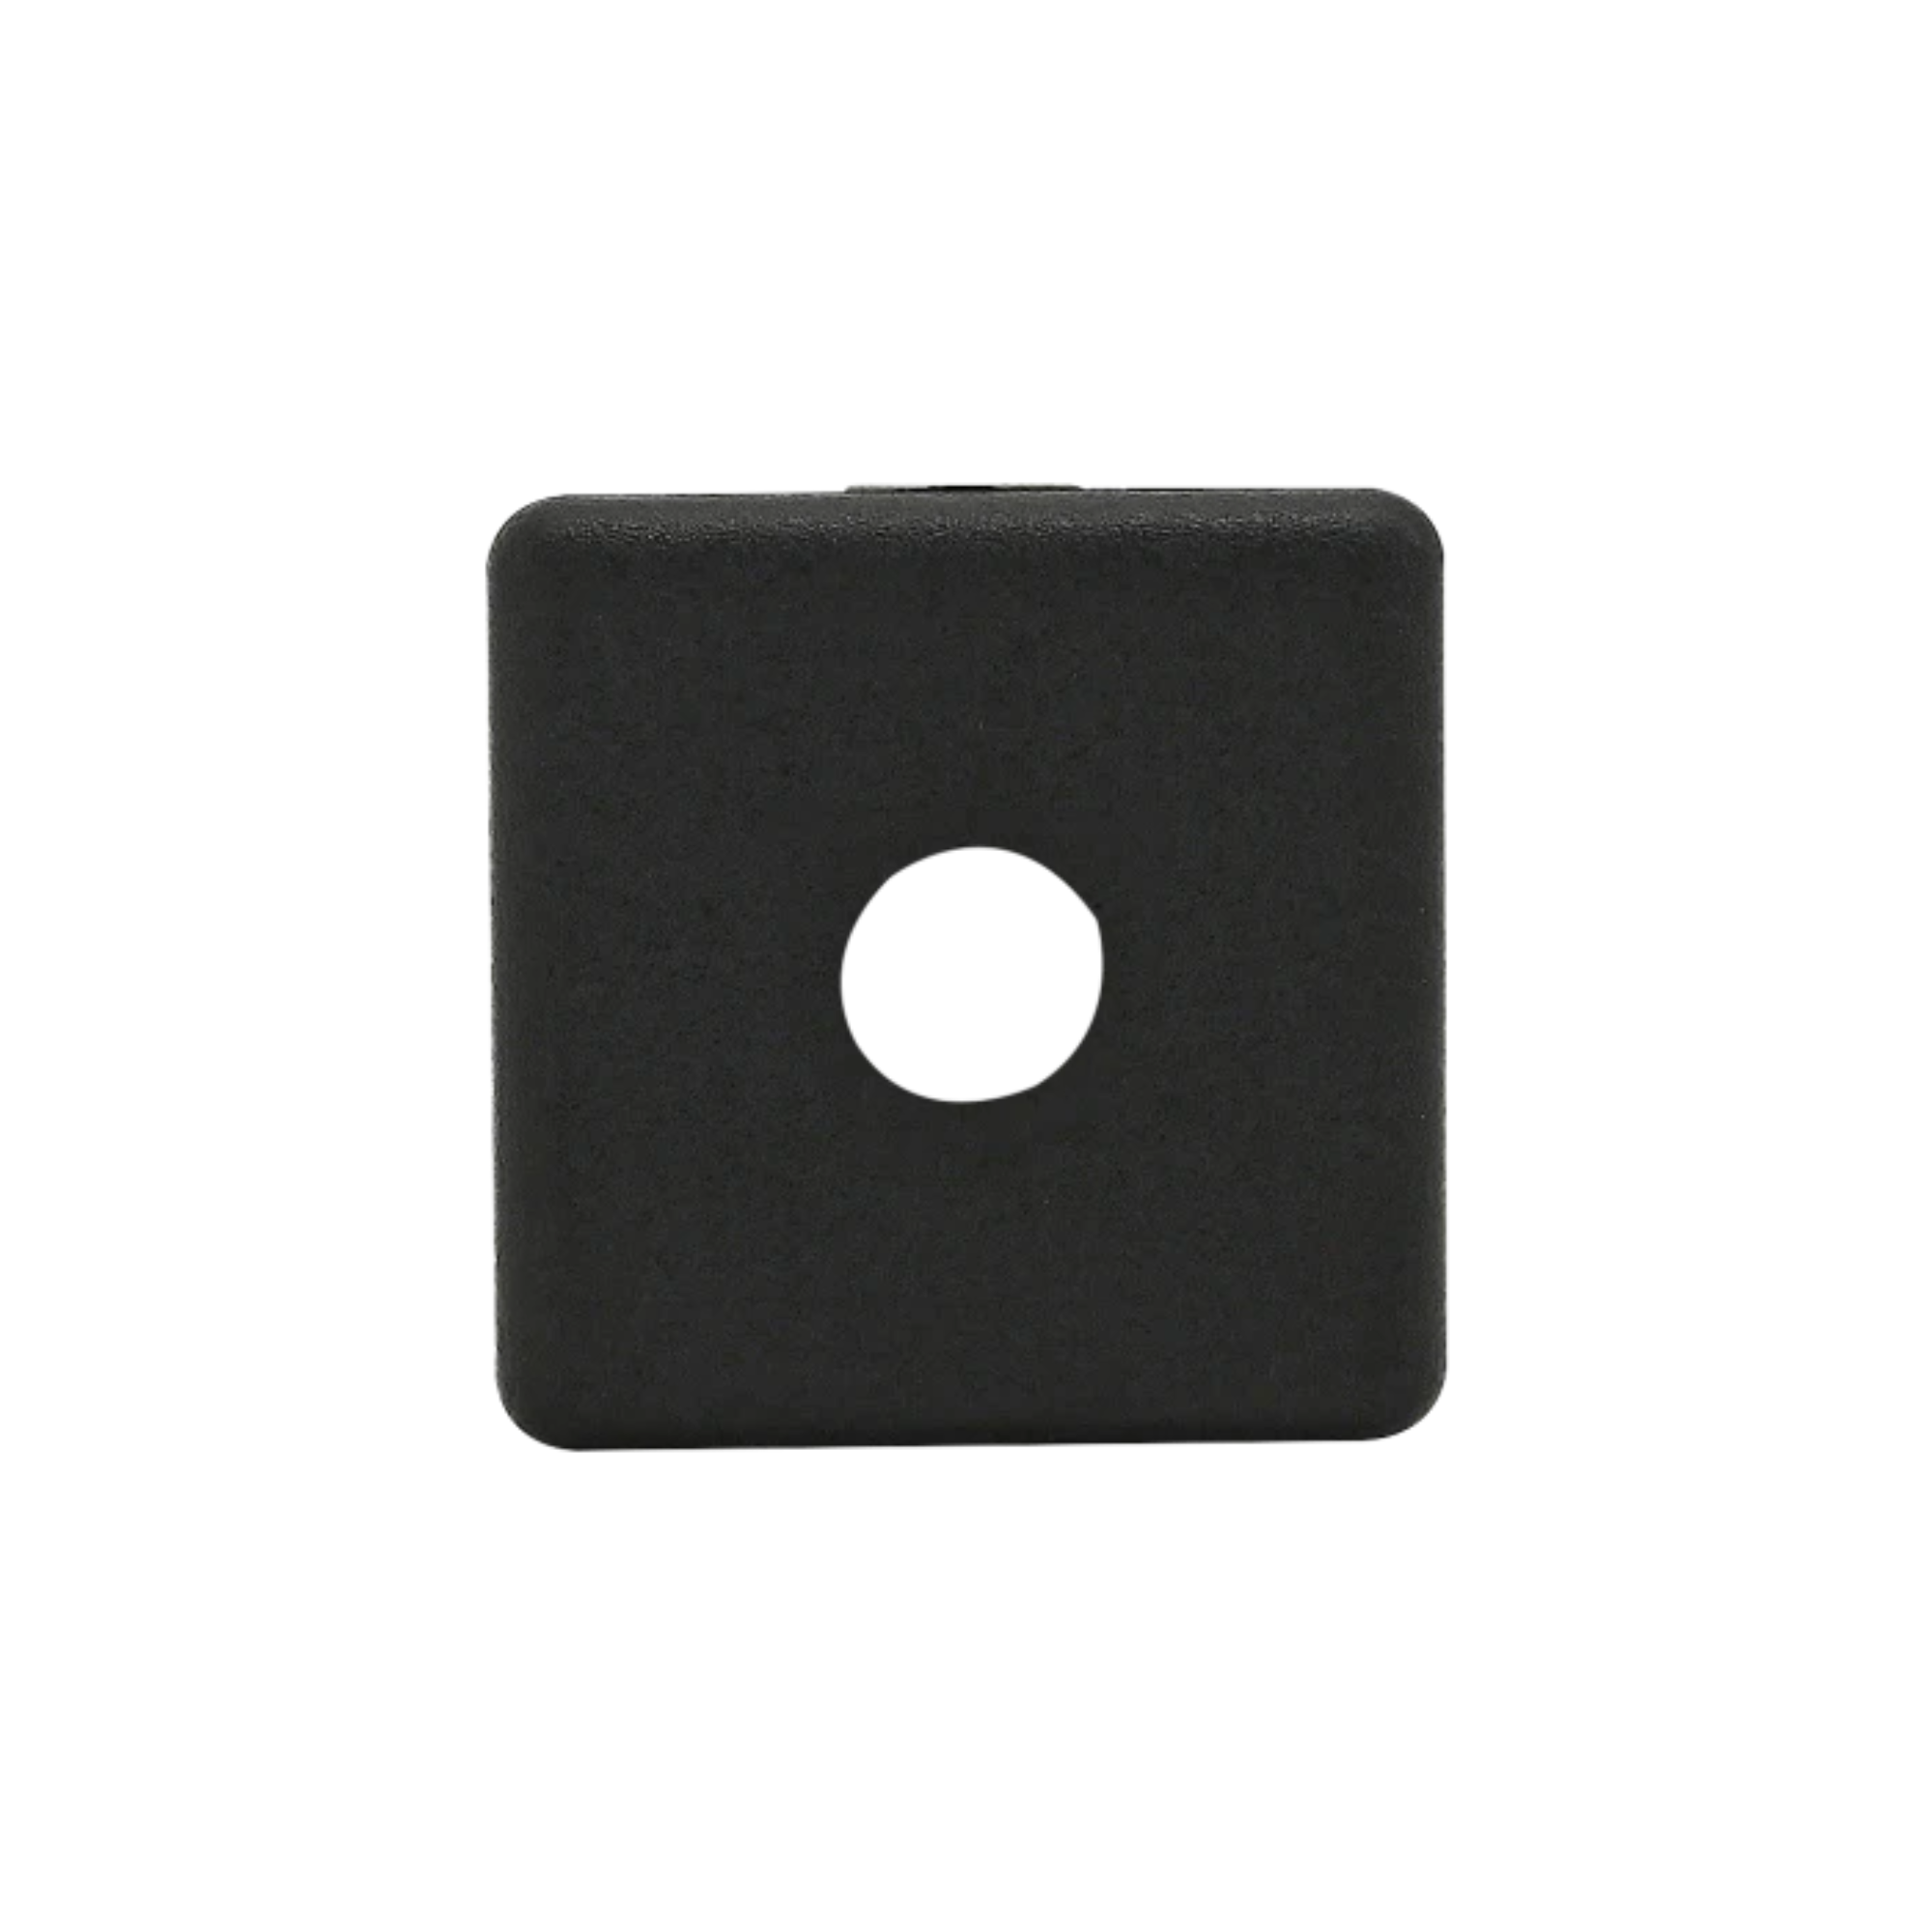 black square with a hole in the center